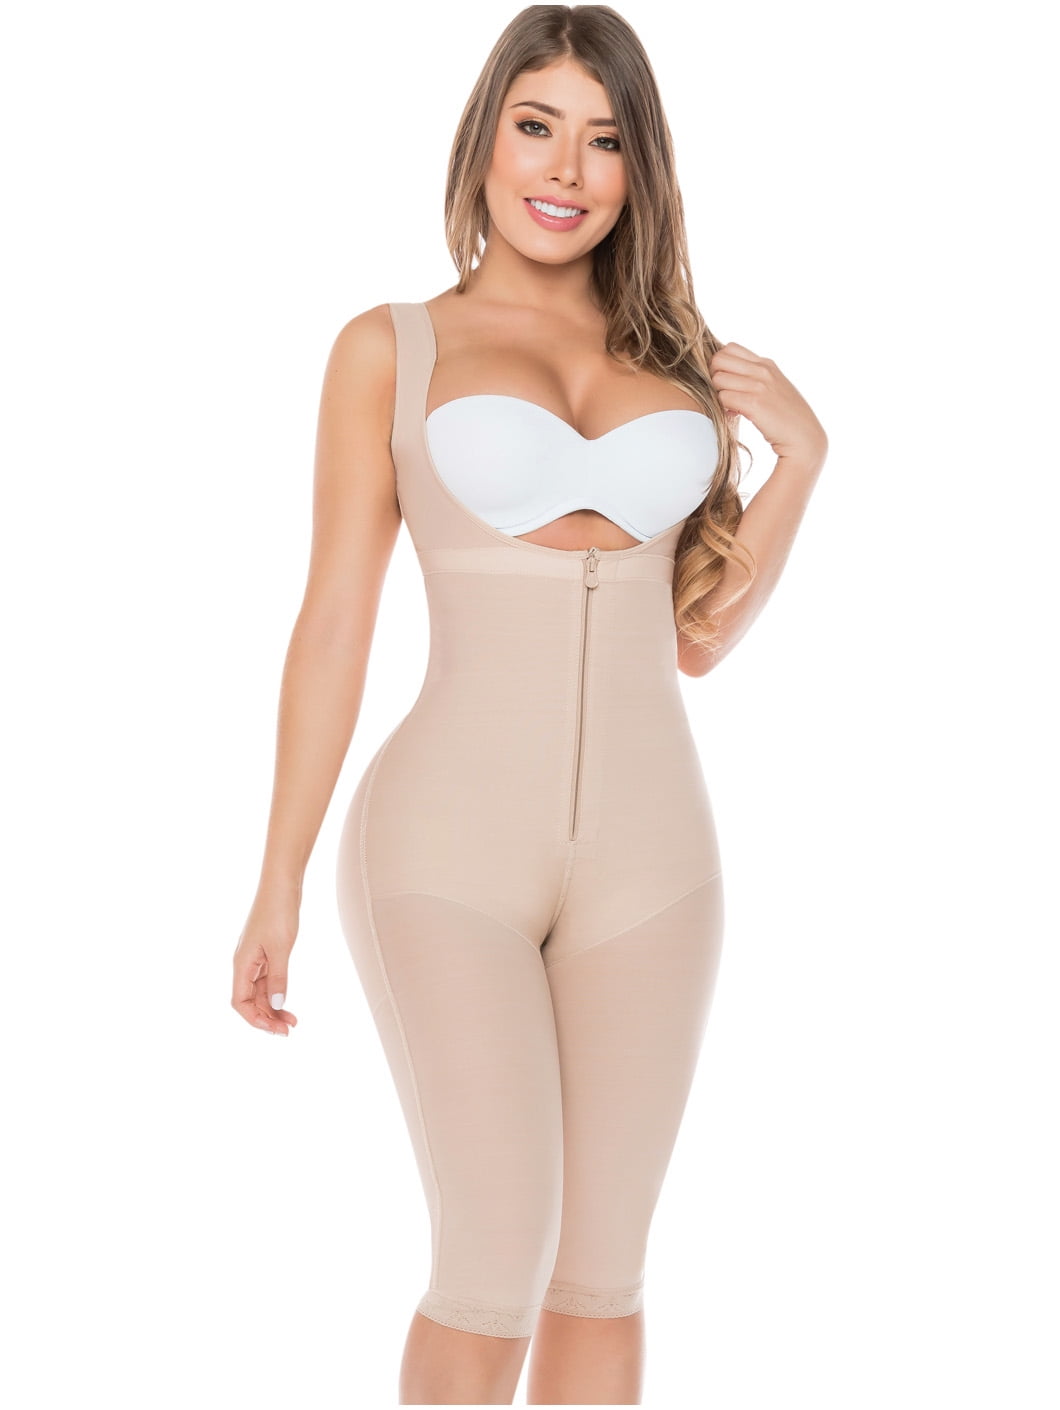 Premium Girdle for Women Fajas Colombianas Fresh and Light